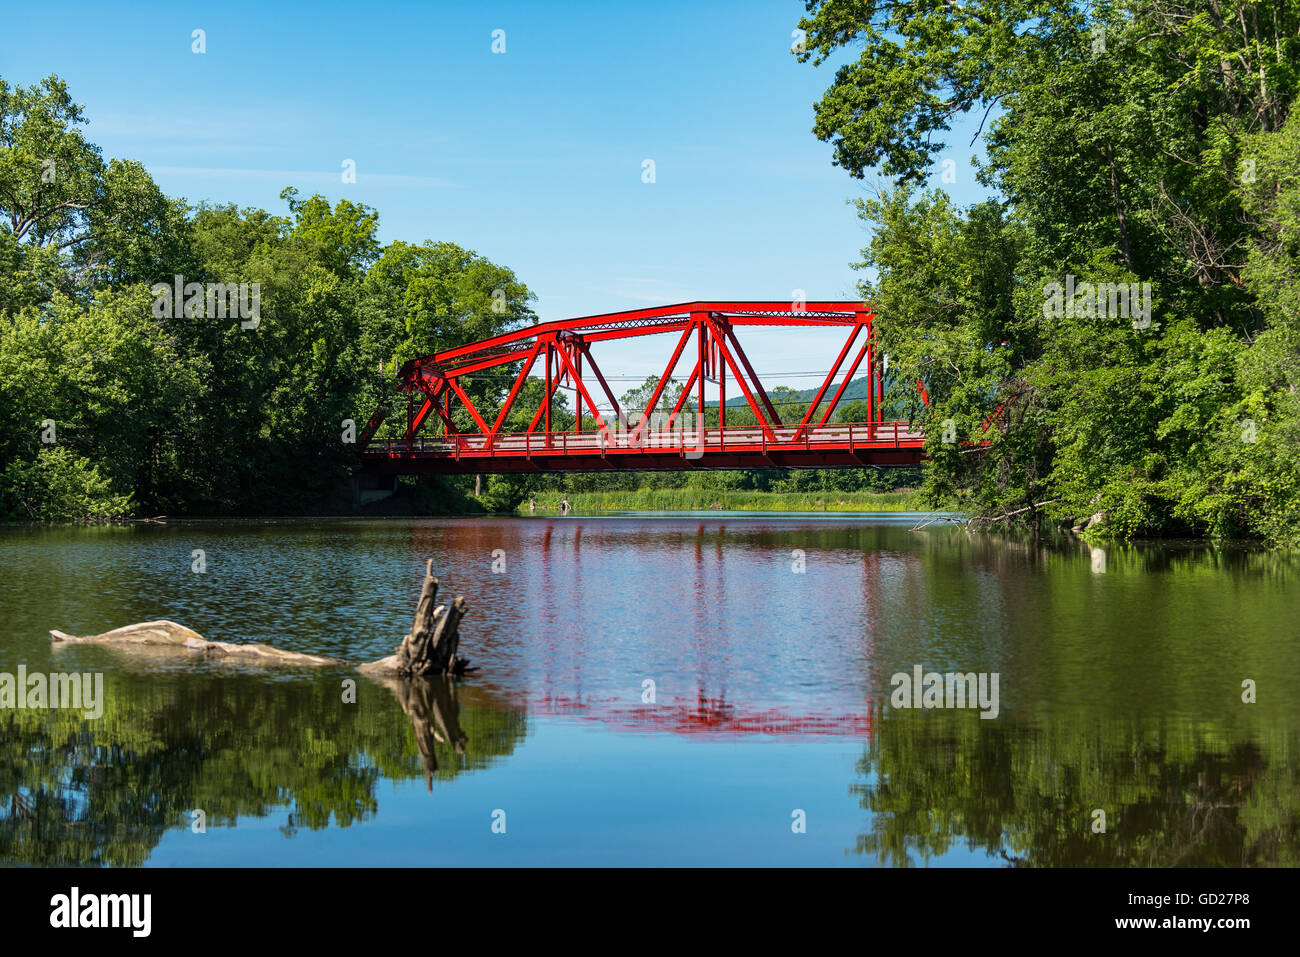 Red Bridge in bright daylight on Route 32 over the Wallkill River near Rifton in the Catskills of Upstate New York. Stock Photo